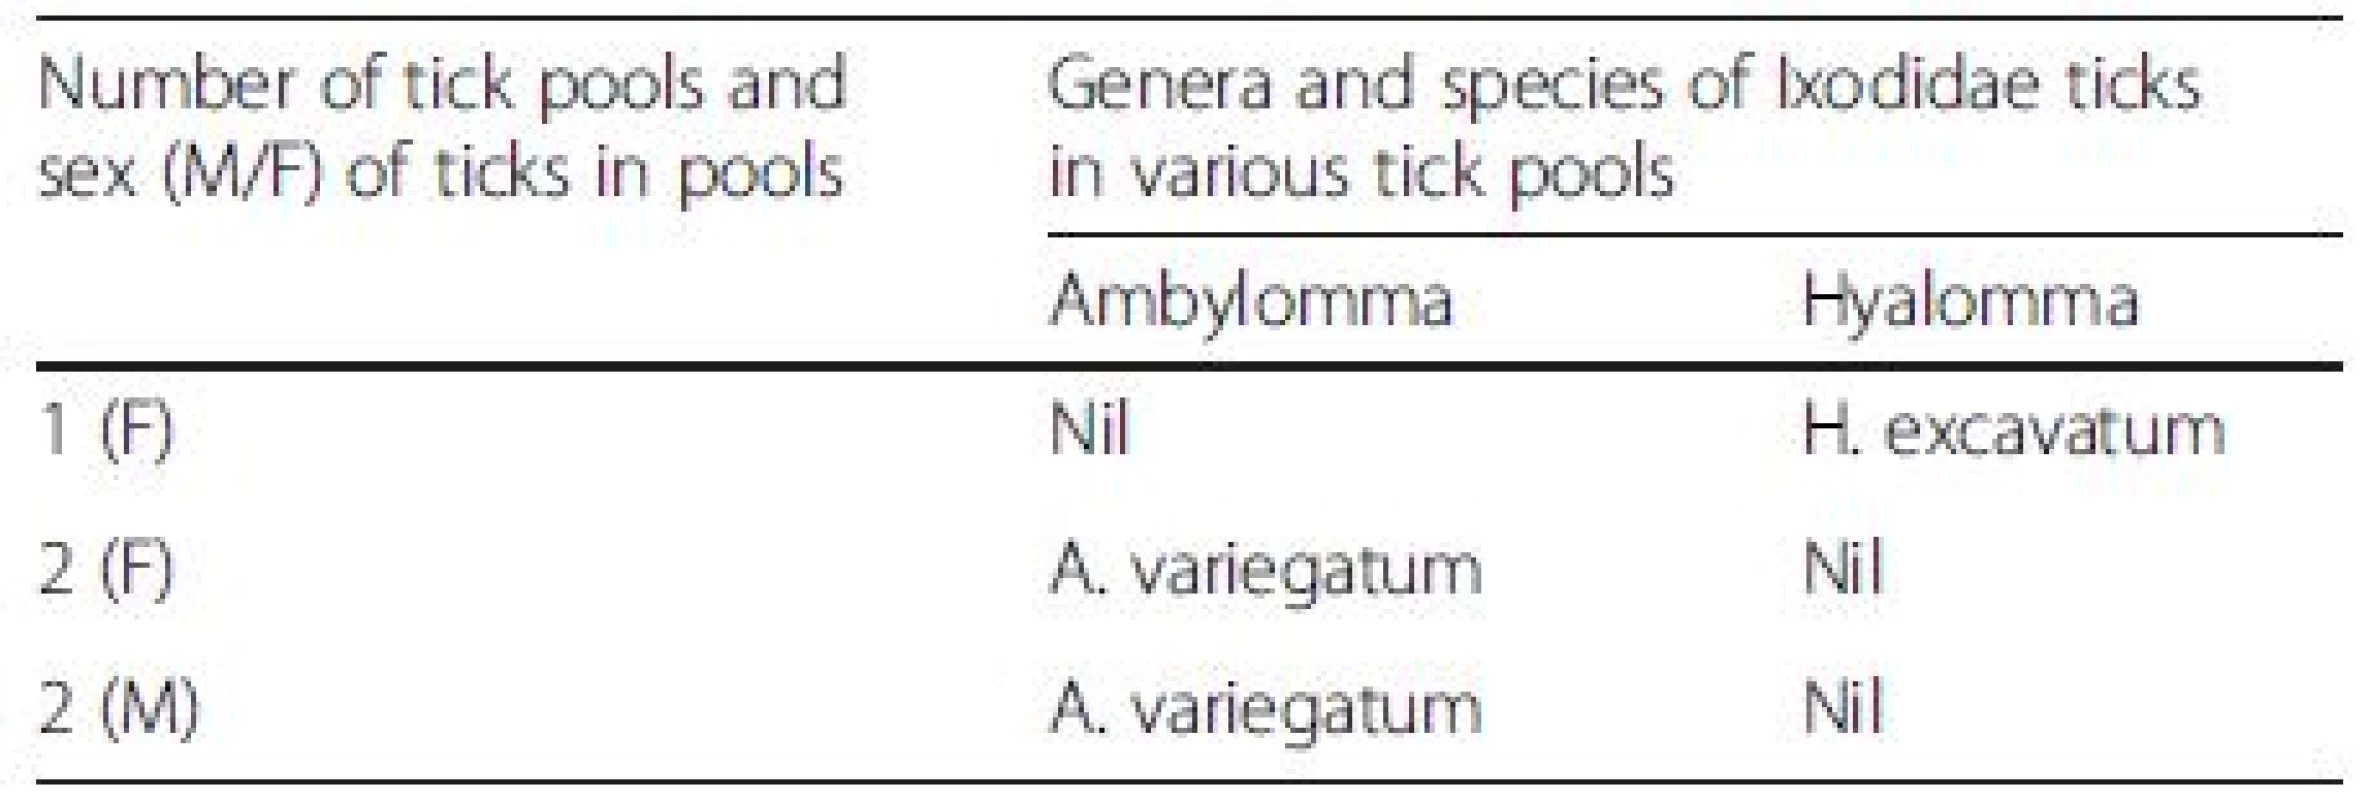 Genera and species of 5 positive adult tick pools from which CCHFV was isolated